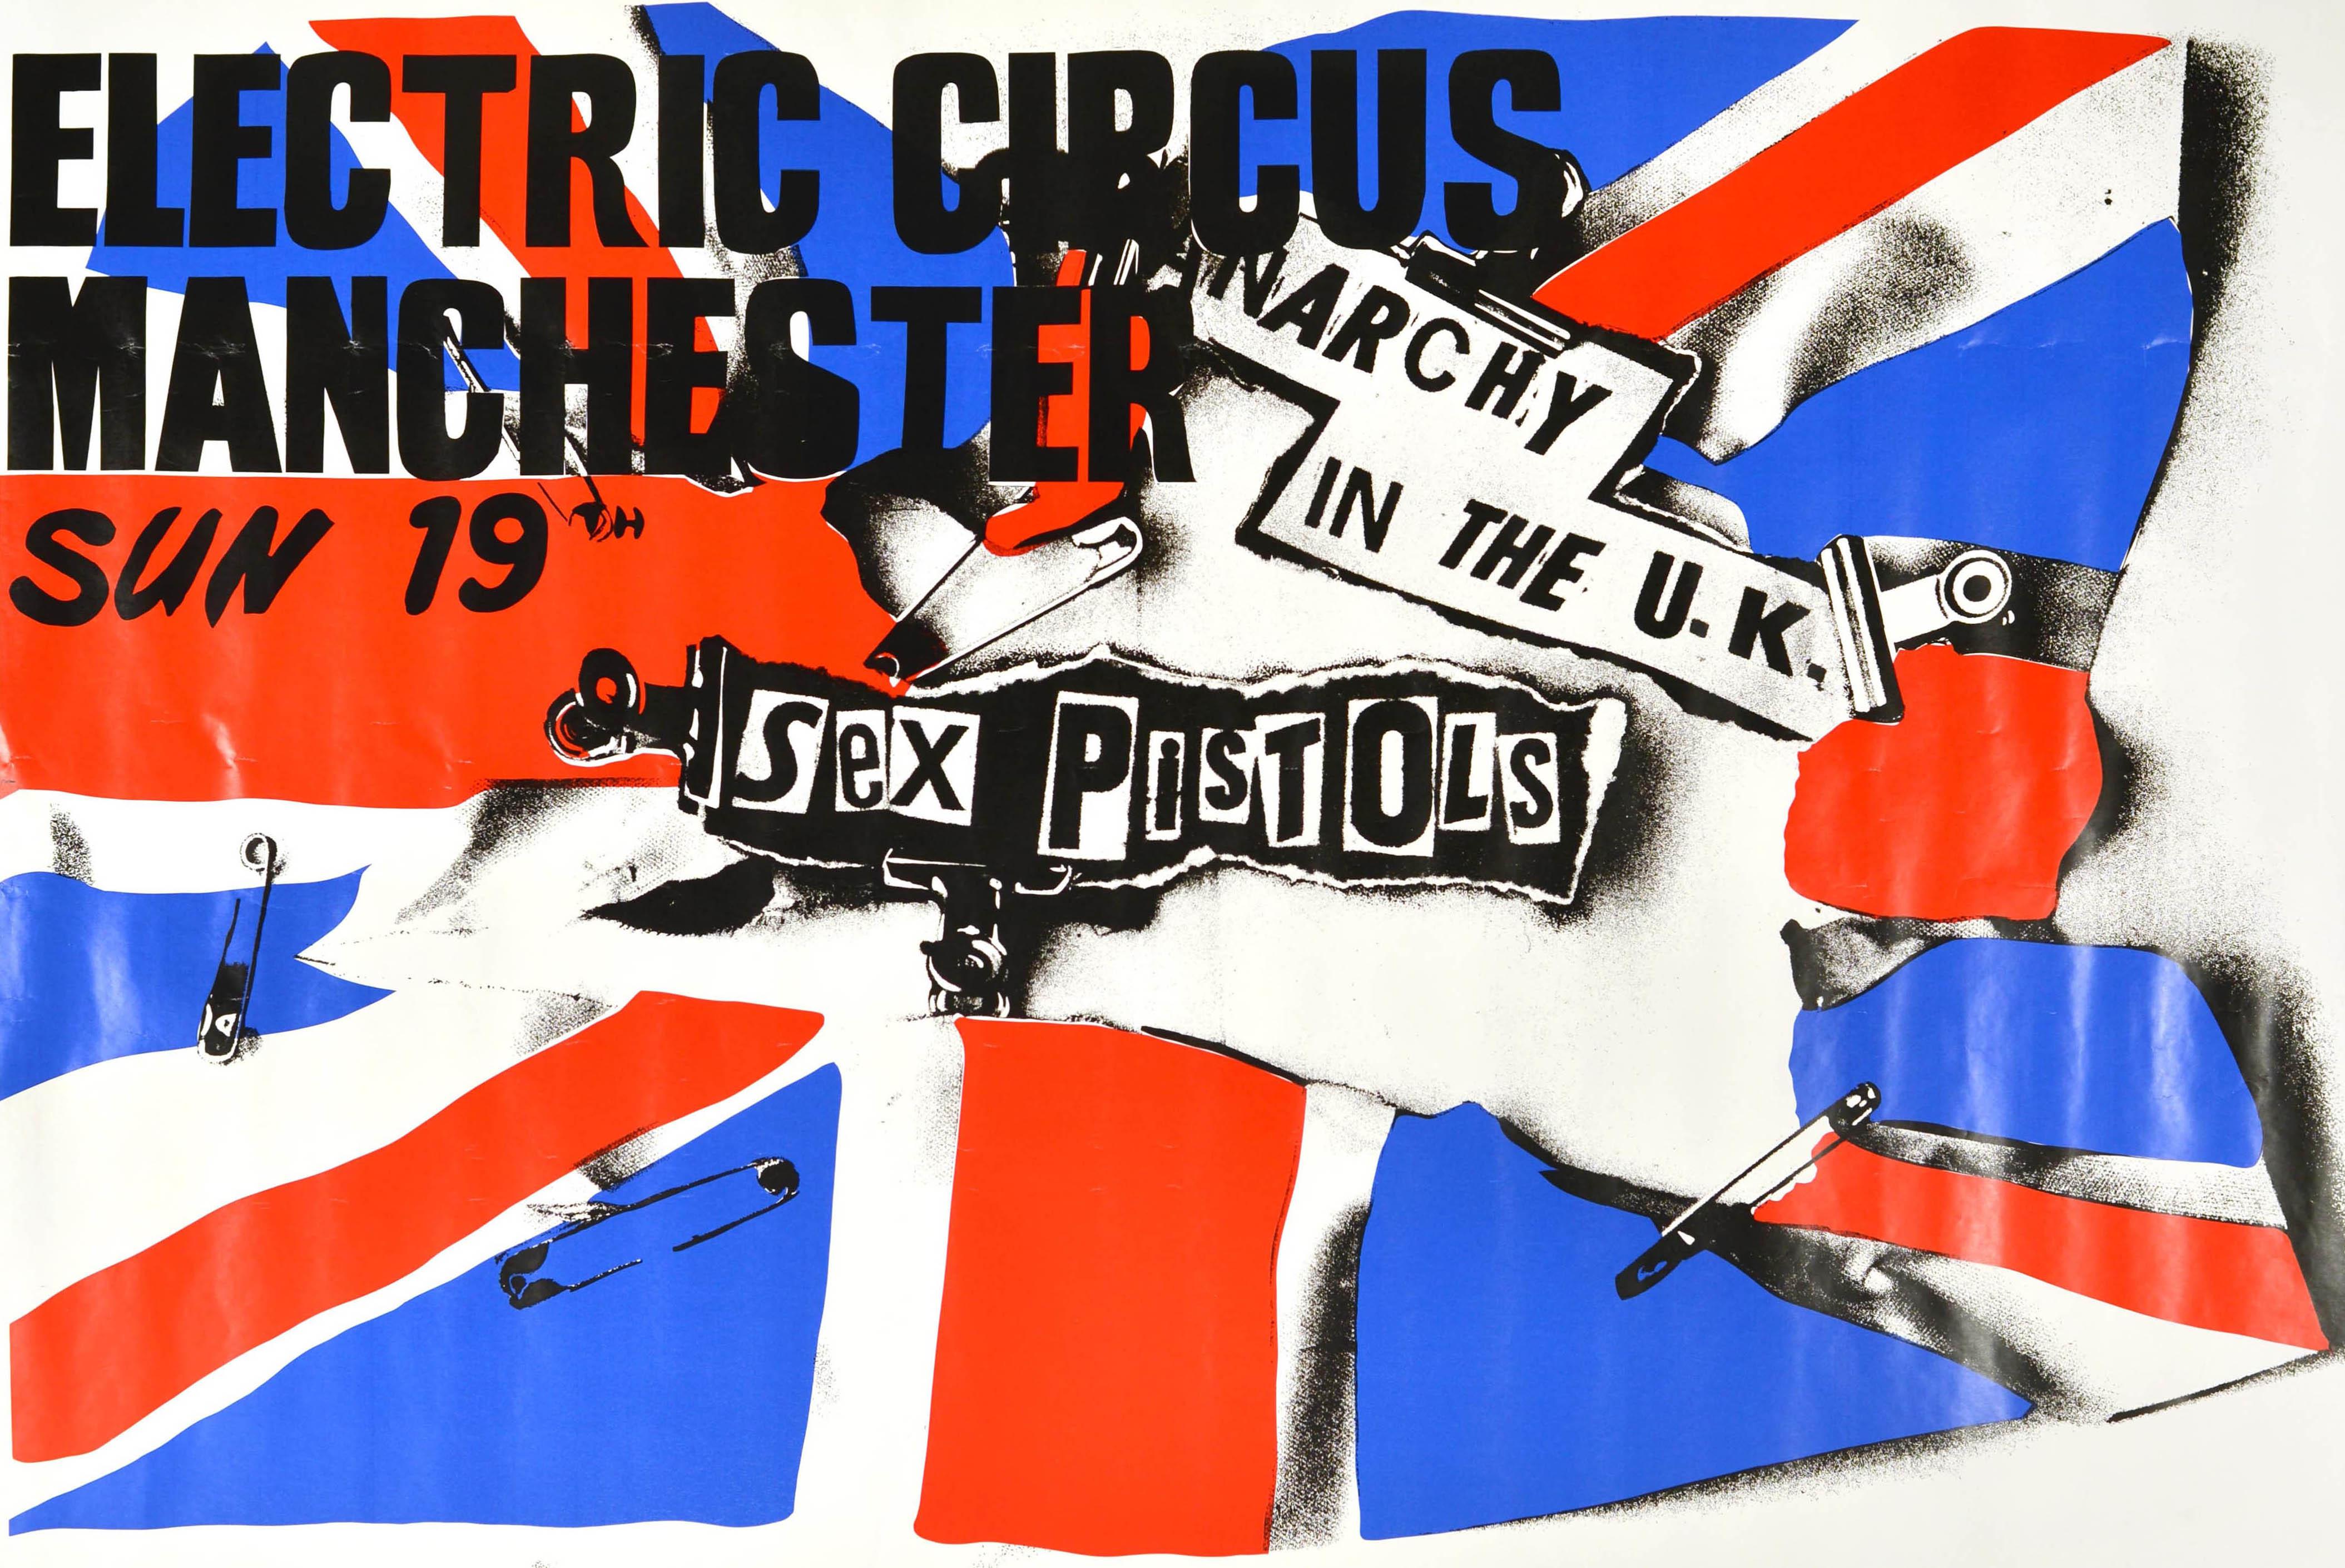 Original vintage music concert advertising poster - Sex Pistols Anarchy In The UK Electric Circus Manchester Sunday 19th First Single - featuring a dynamic design by the English artist Jamie Reid (b.1947) depicting a torn Union Jack flag of the